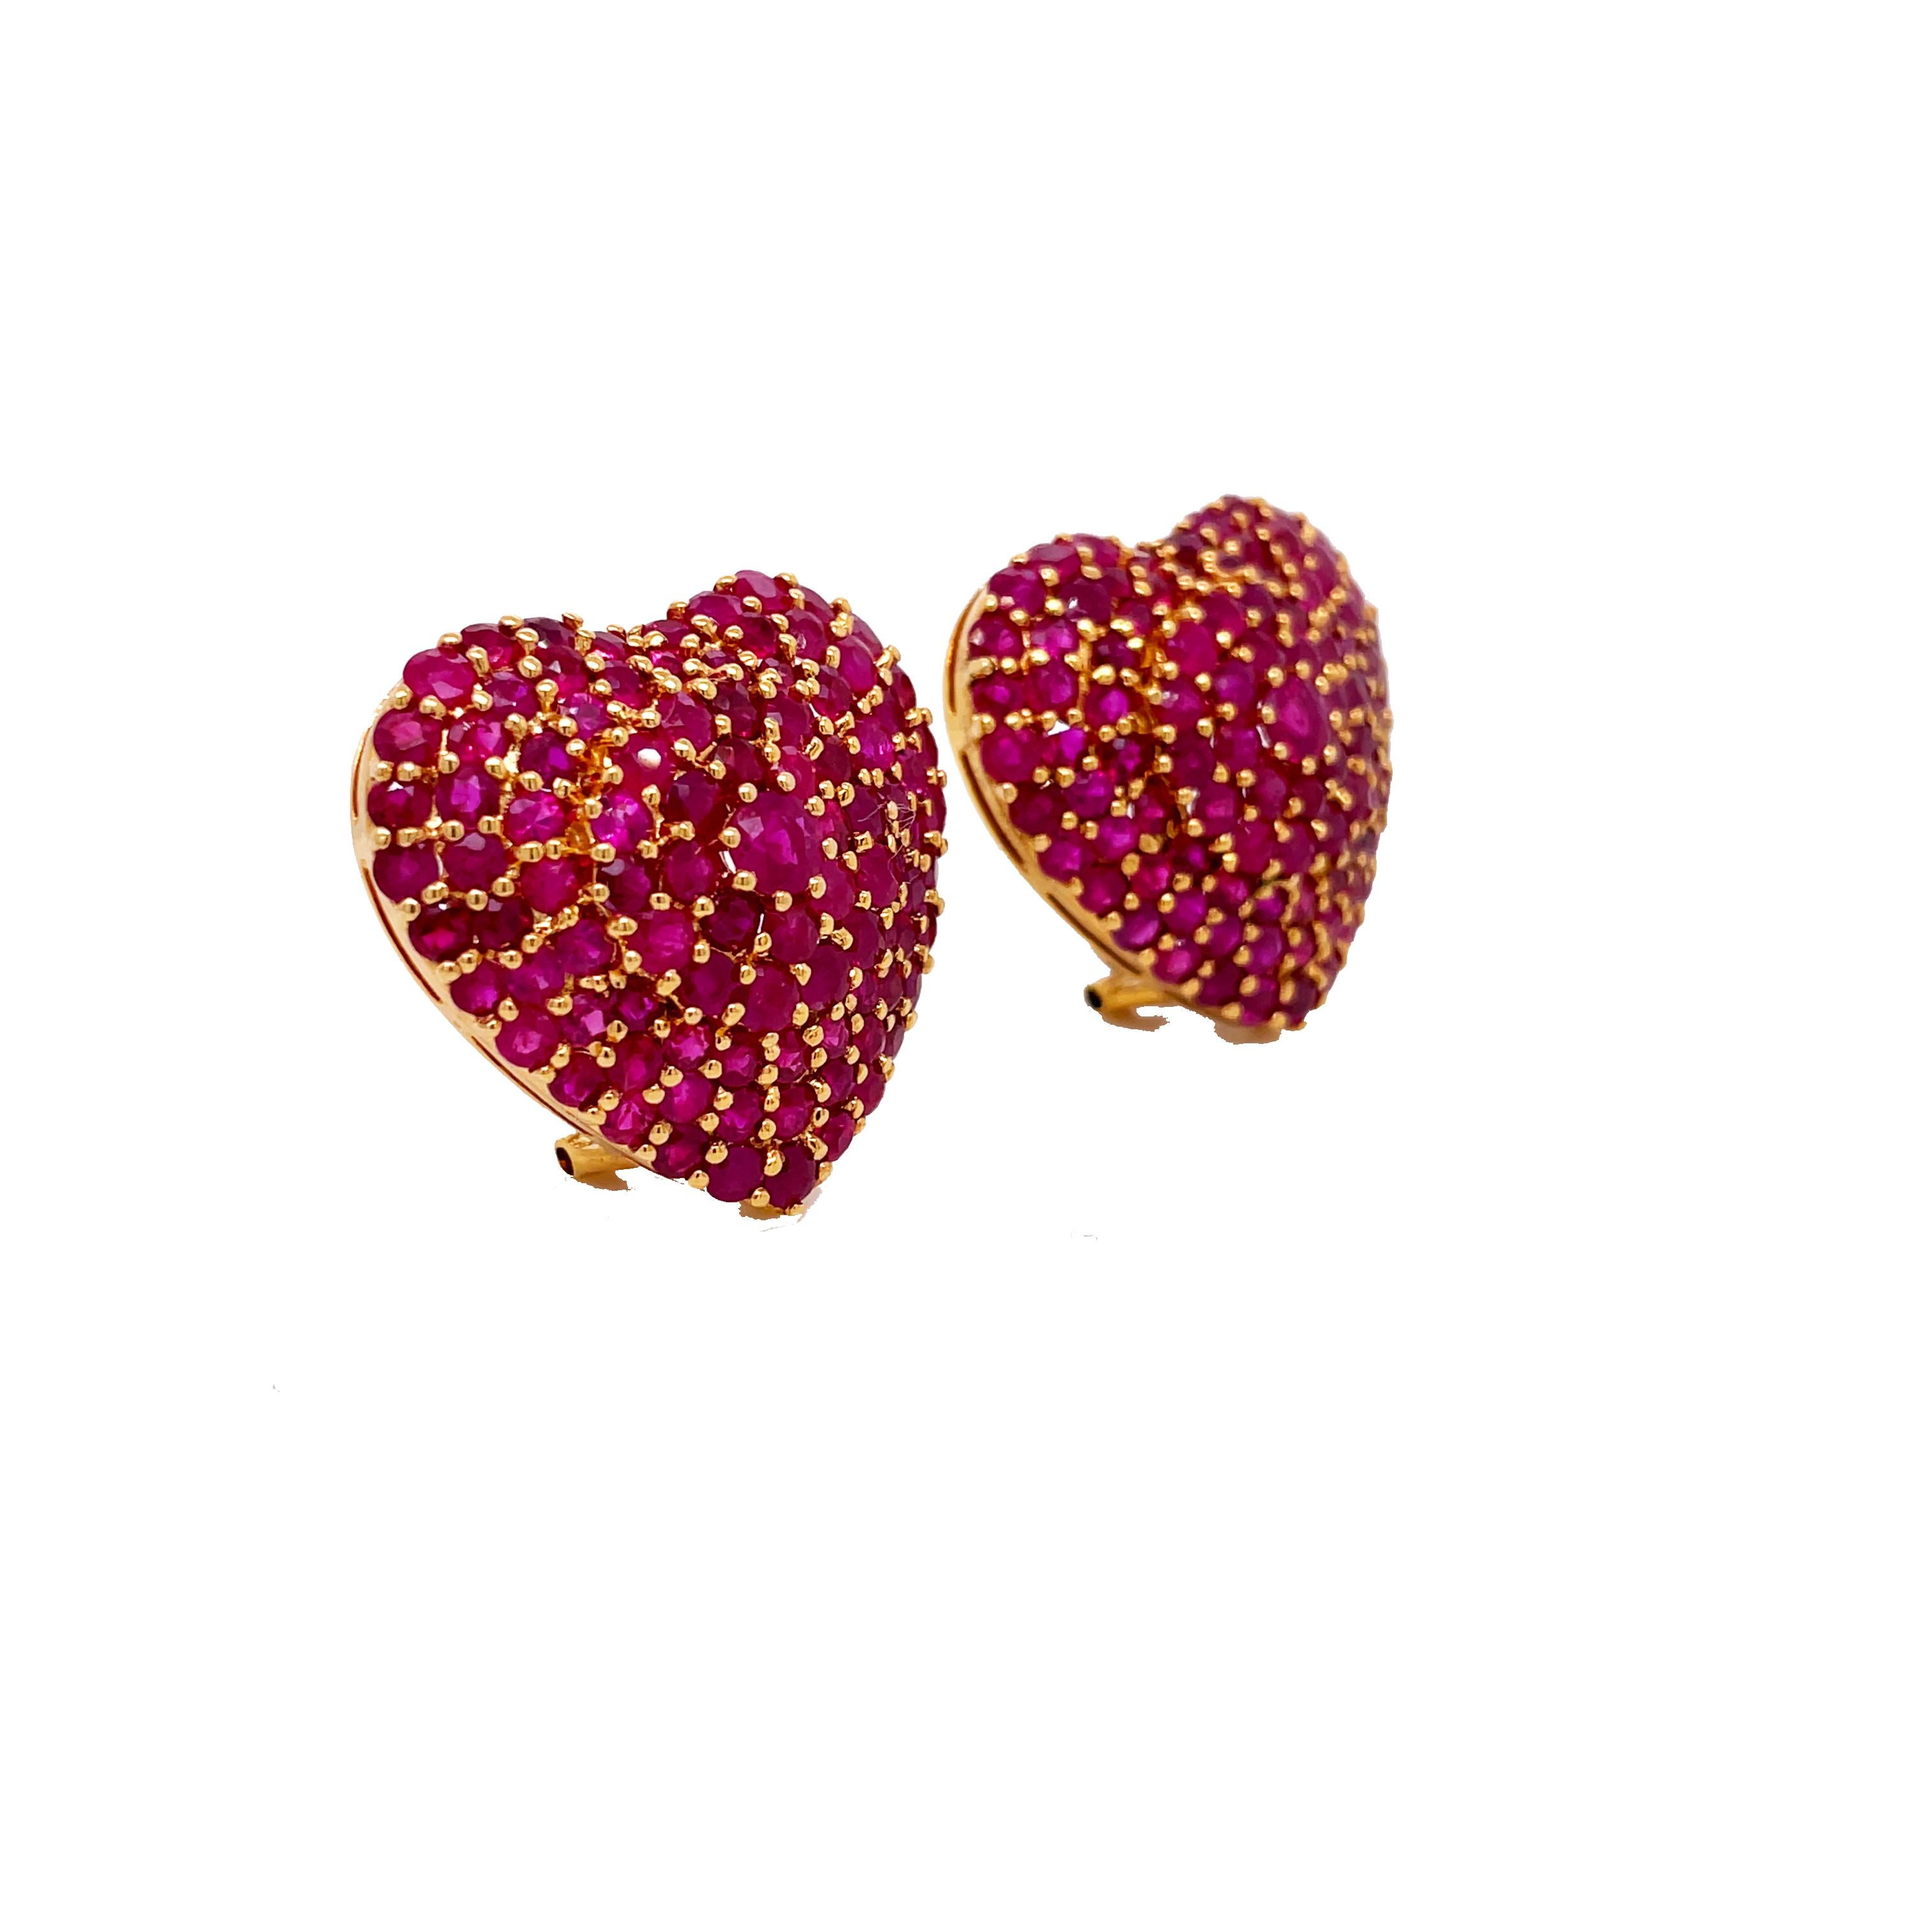 This is an absolutely killer pair of clip-on earrings that are guaranteed to spark a conversation that features dazzling vivid rubies set in 18K Yellow Gold. Each heart is beautifully set with 4.28 cttw round rubies and is complemented by the bright